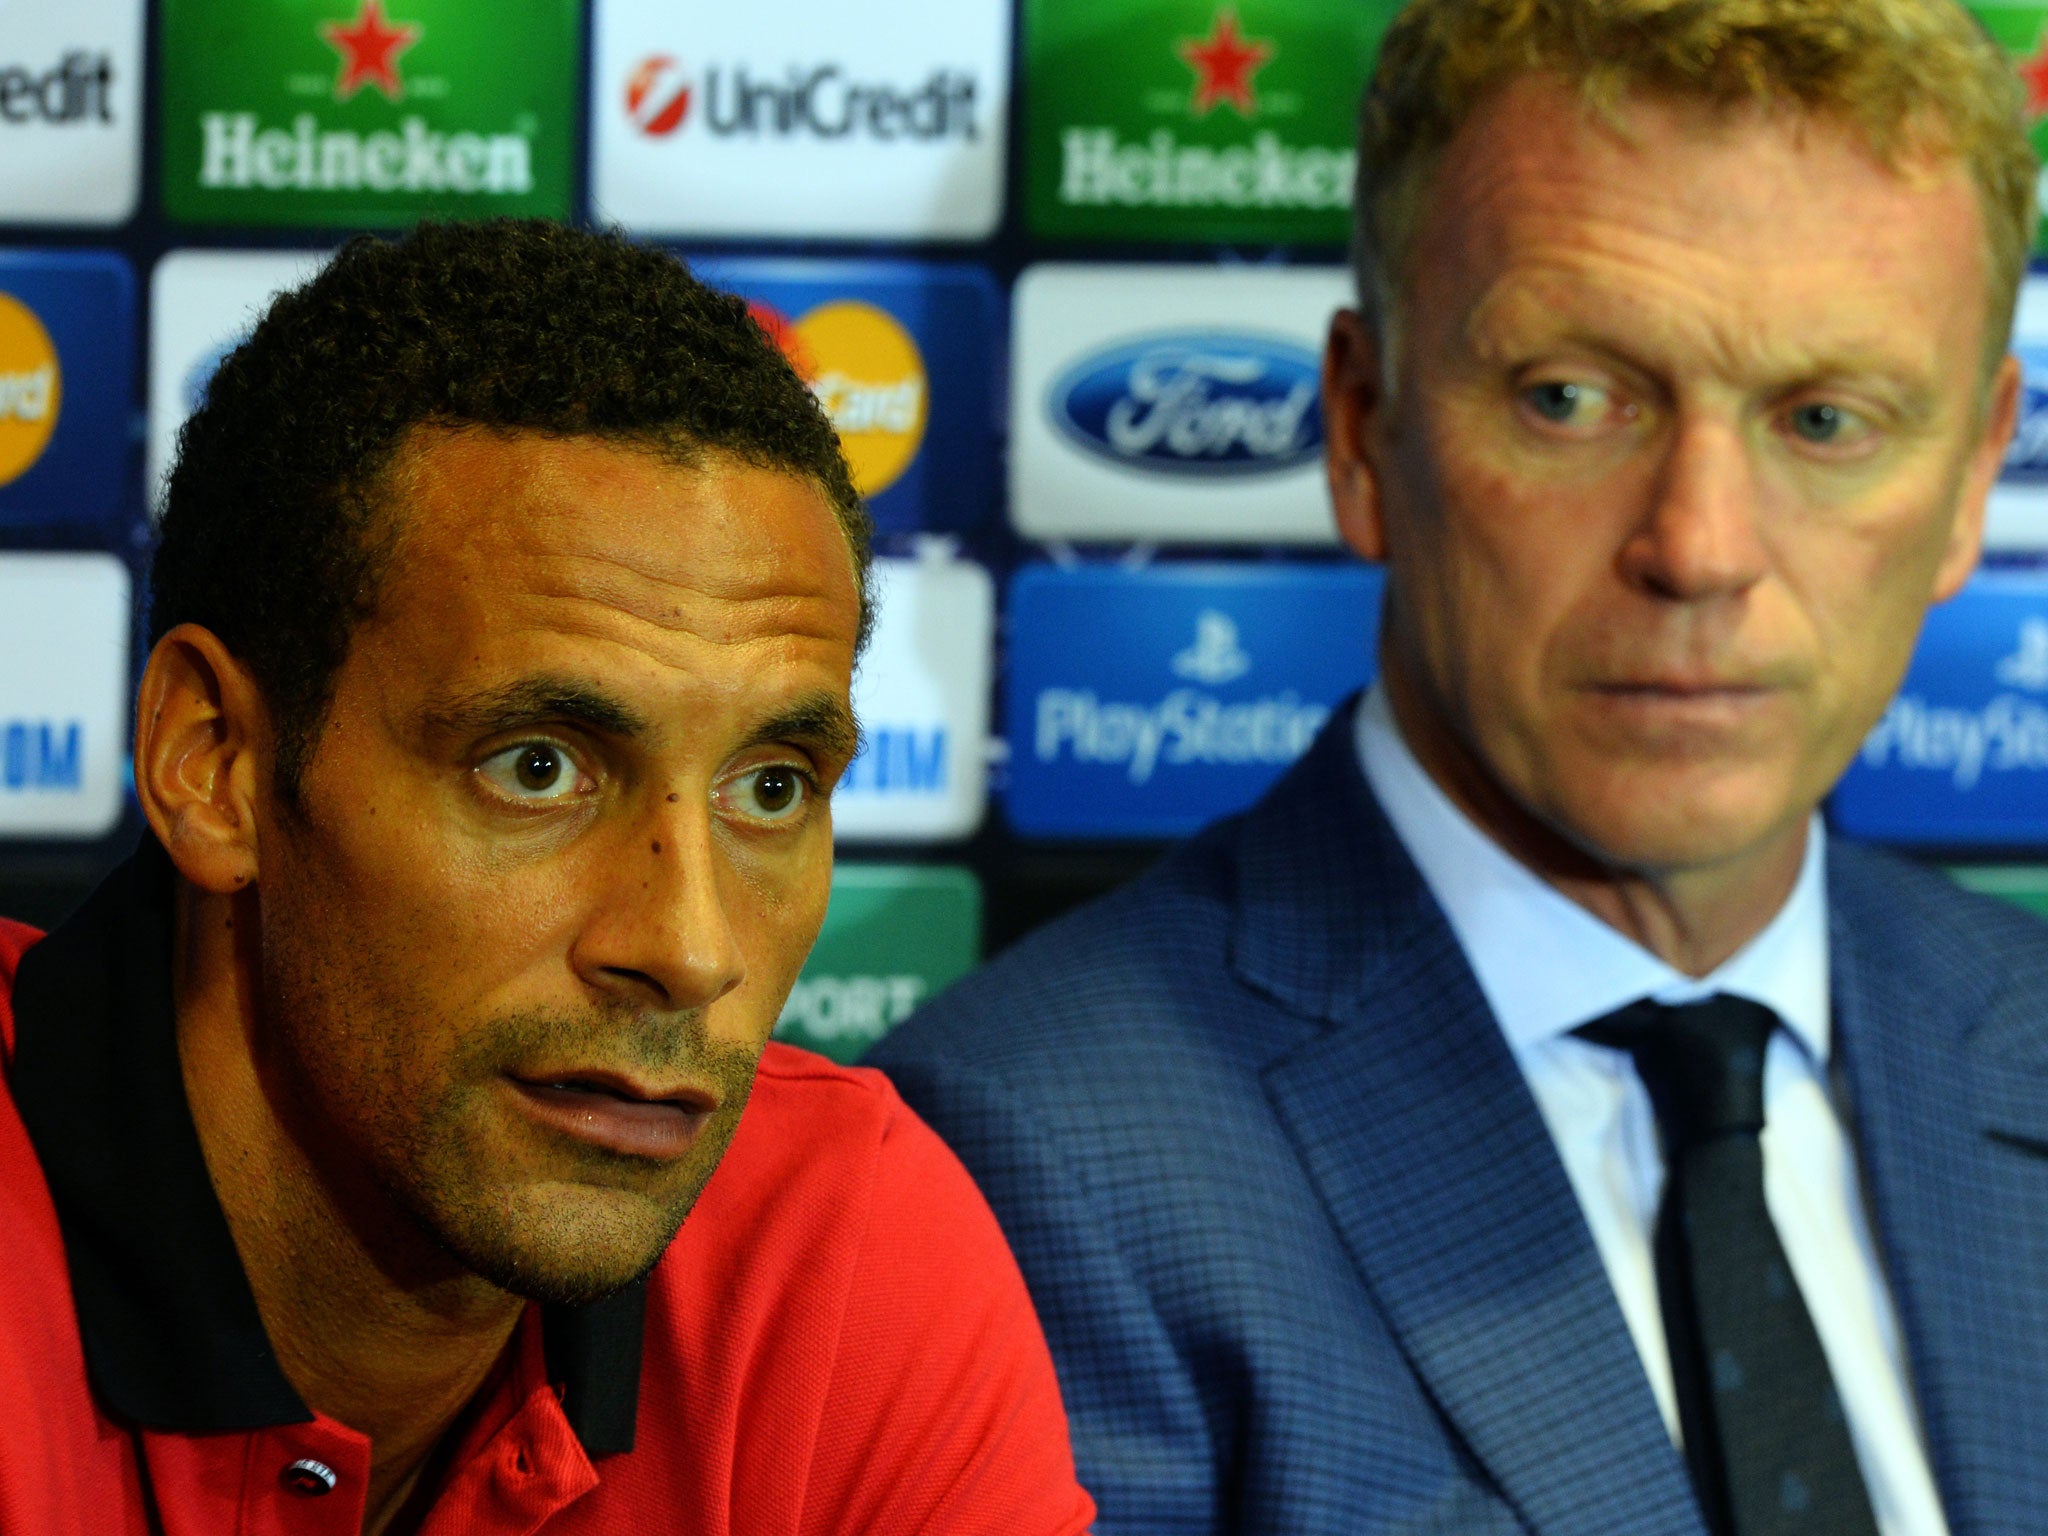 Rio Ferdinand still has a role to play at Manchester United according to David Moyes